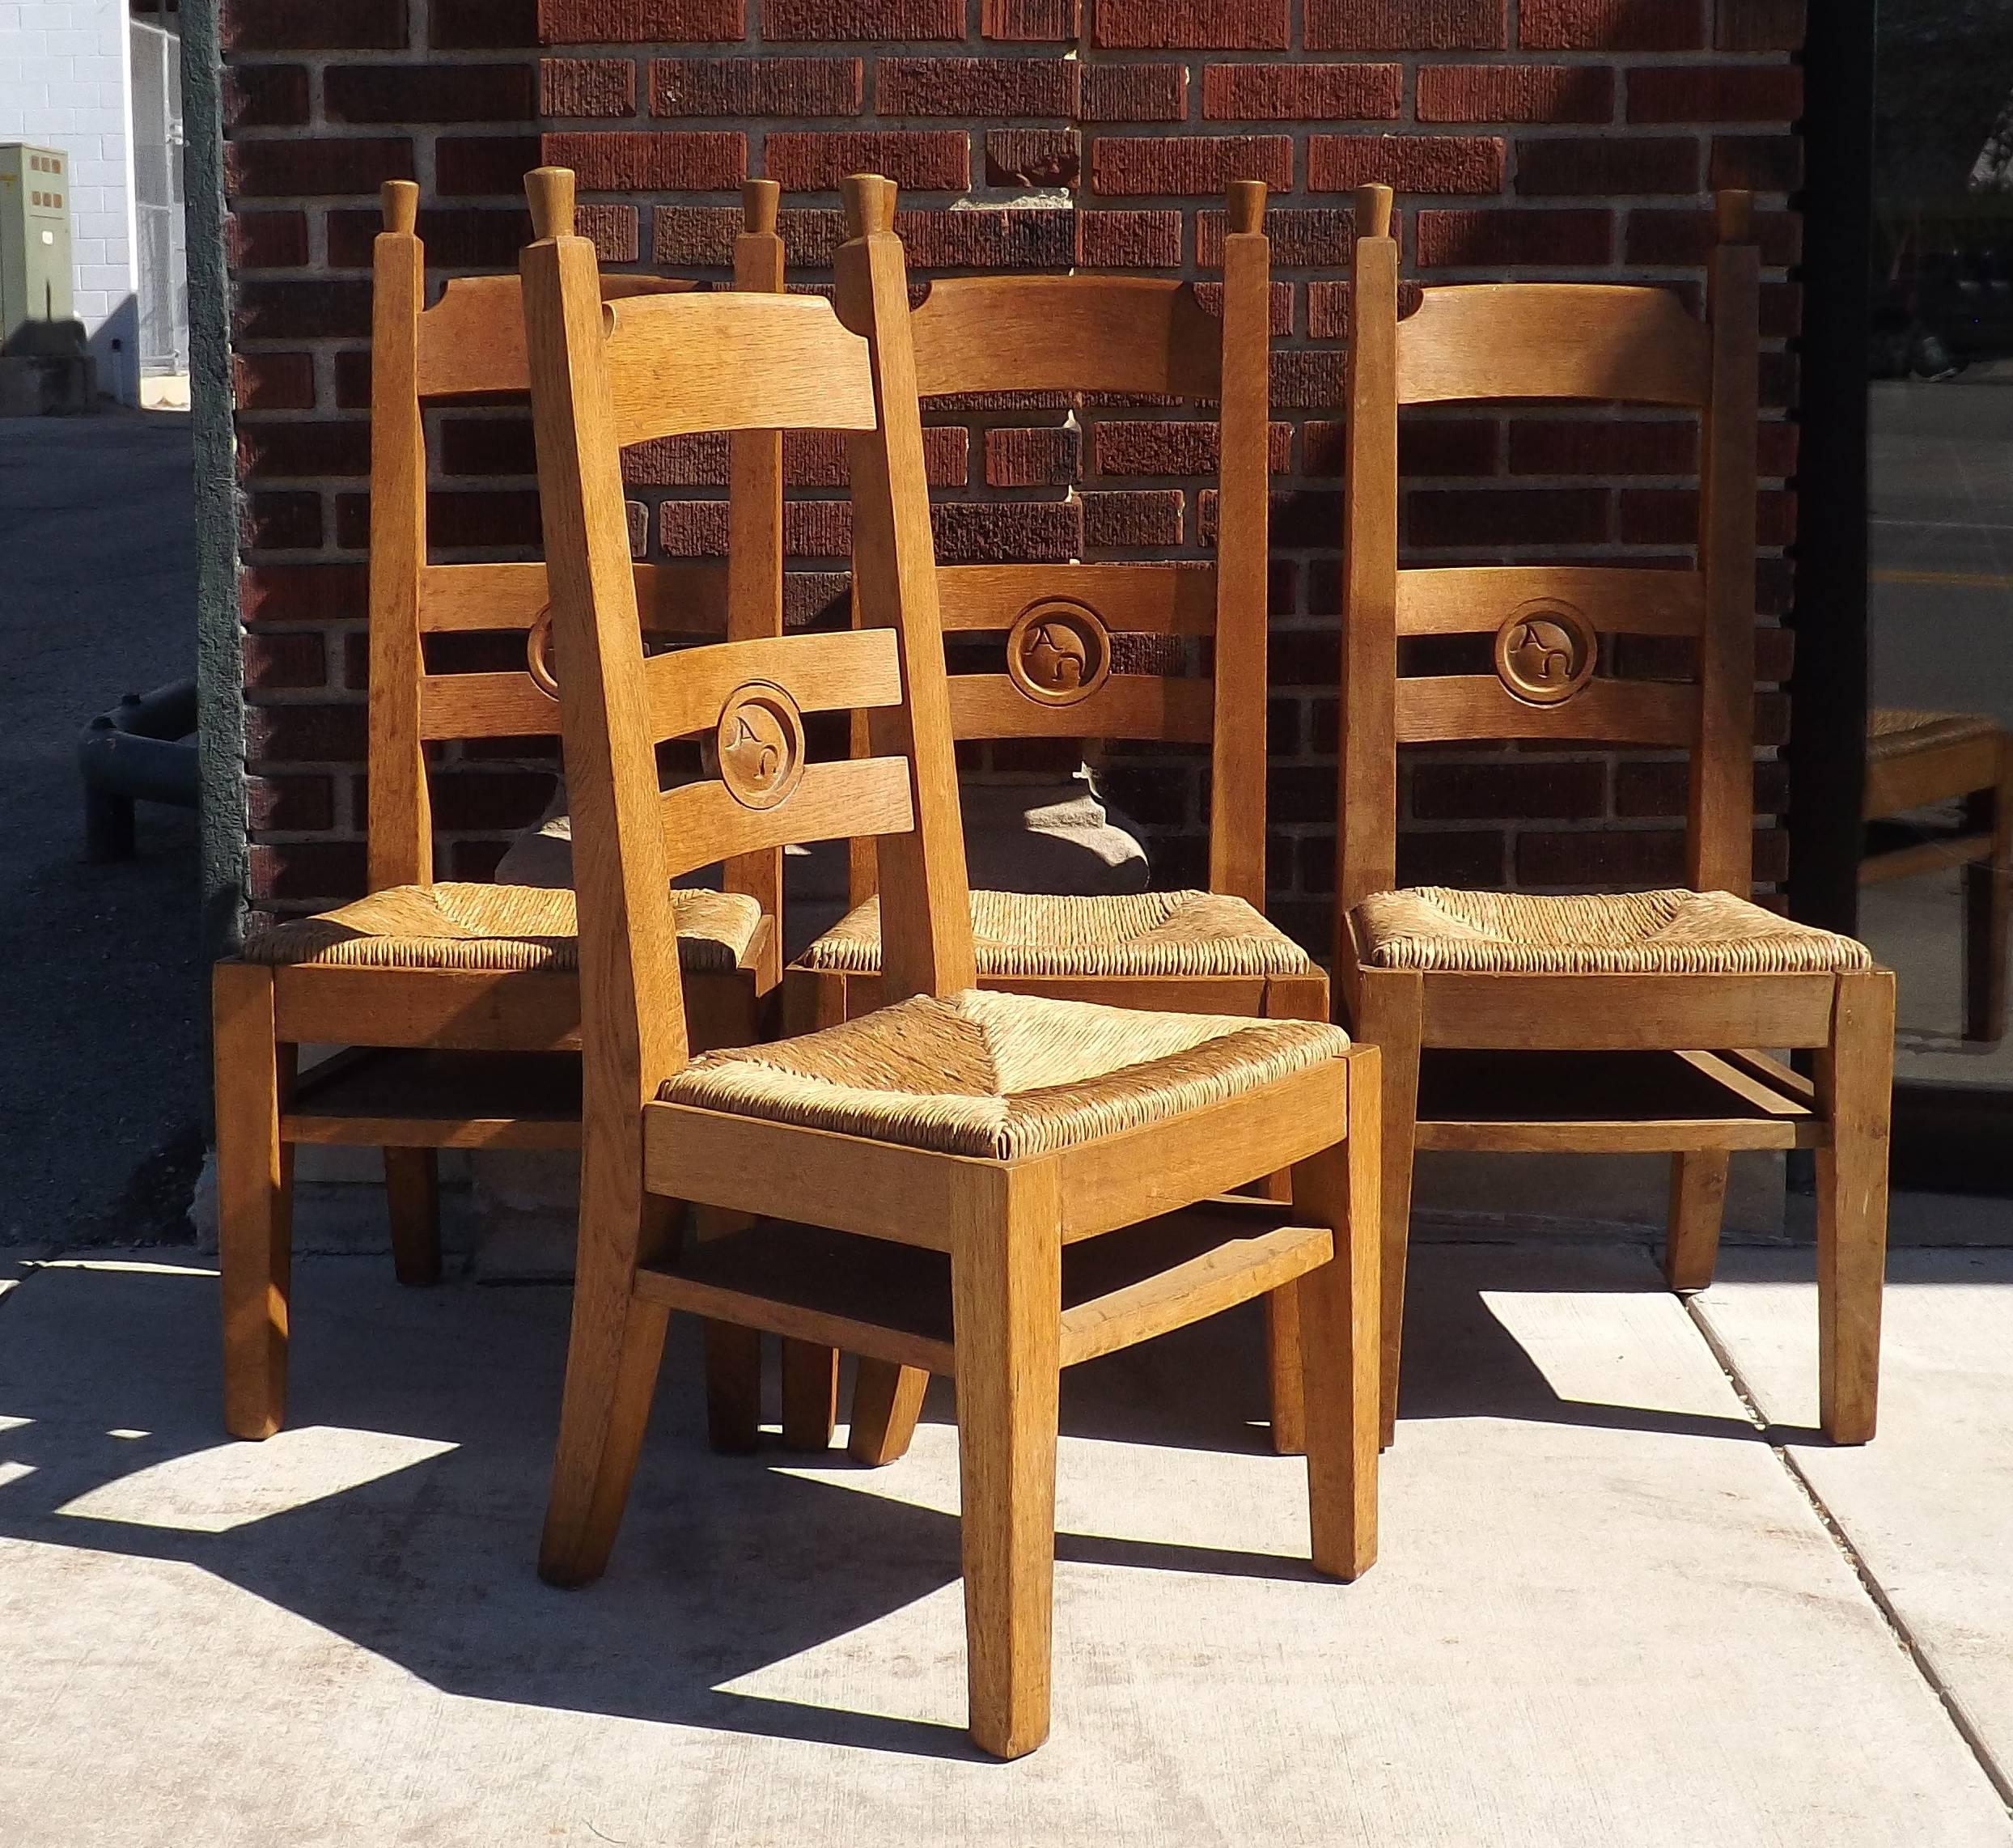 A collection of church chairs from the St. Eusebius church in Arnhem, The Netherlands, 12 in total, carved with 'Alpha Omega' on the backs. Shown in the archival photographs. Priced individually if you might want a set of six or eight chairs. With